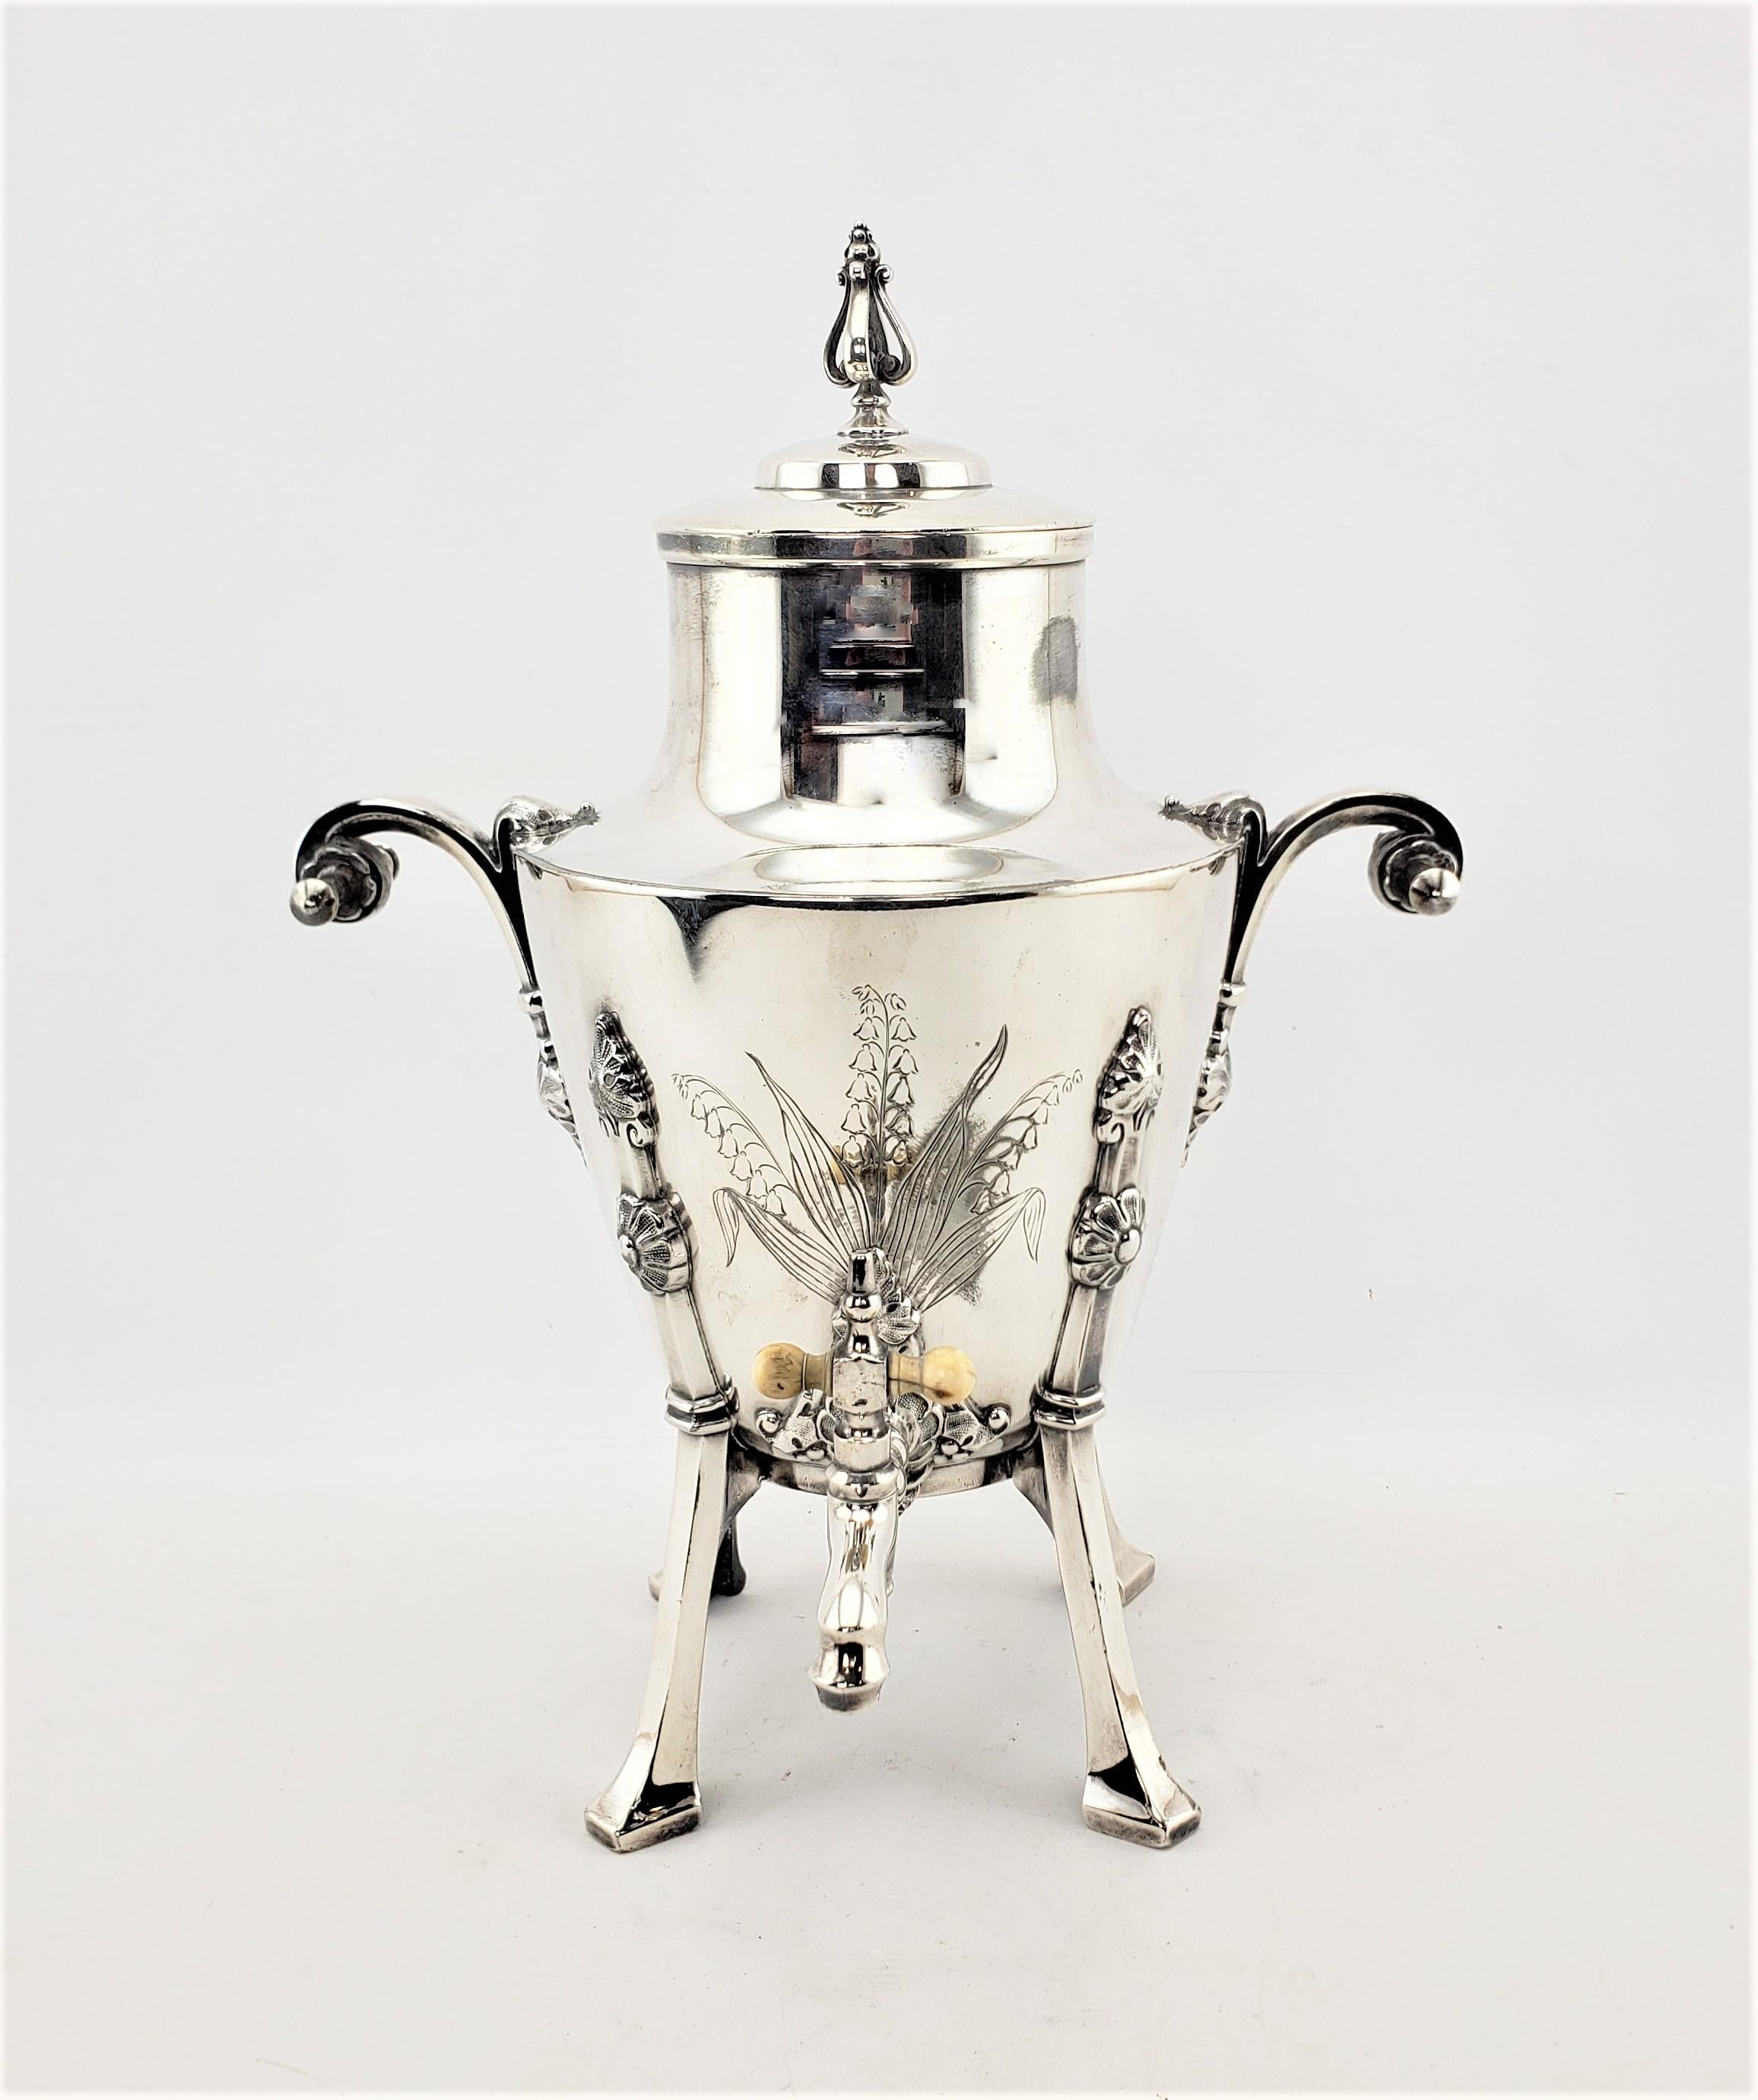 Antique Aesthetic Movement Silver Plated Hot Water Urn with Floral Decoration In Good Condition For Sale In Hamilton, Ontario